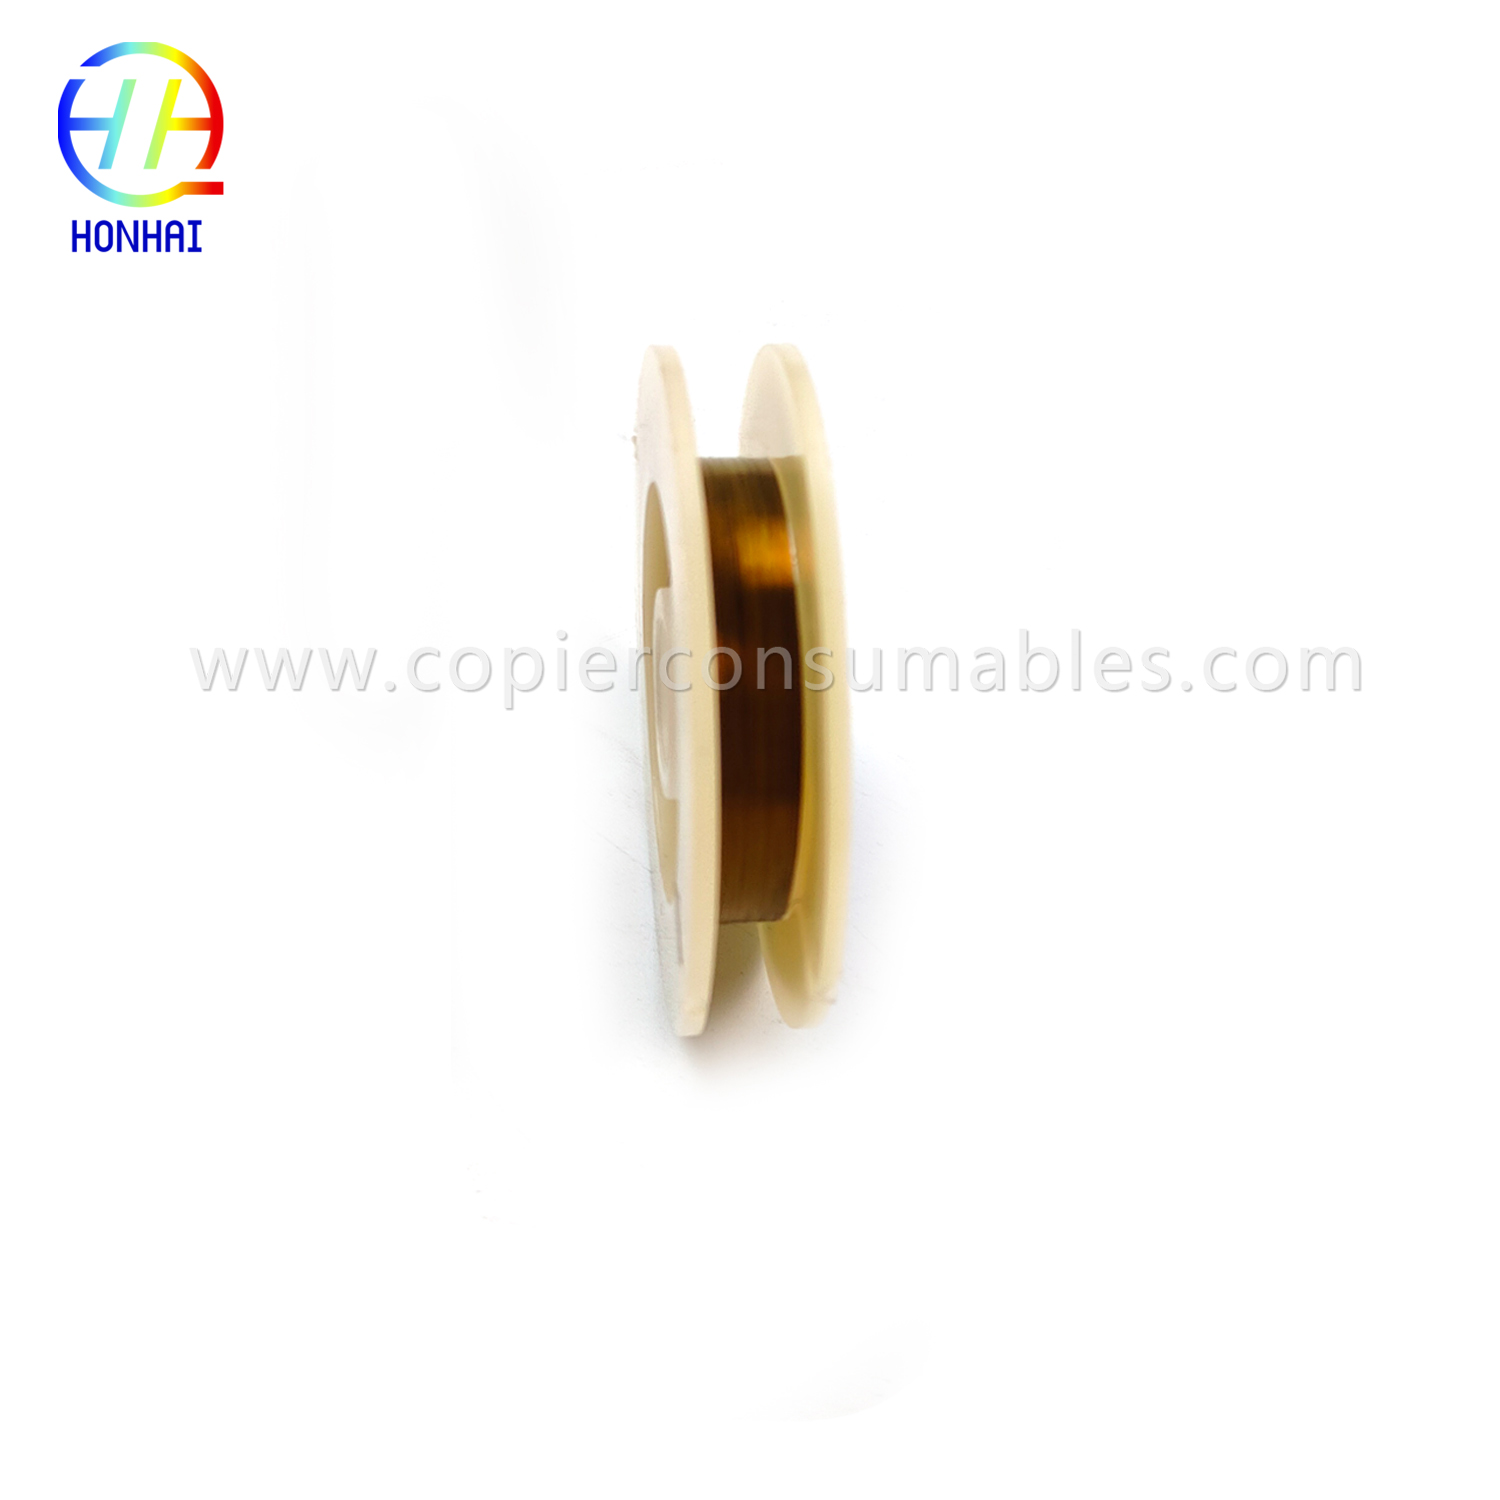 https://www.copierconsumables.com/wire-electrode-for-canon-ir5000-6275-8205-6075-8105-8505-8295-6575-ምርት/